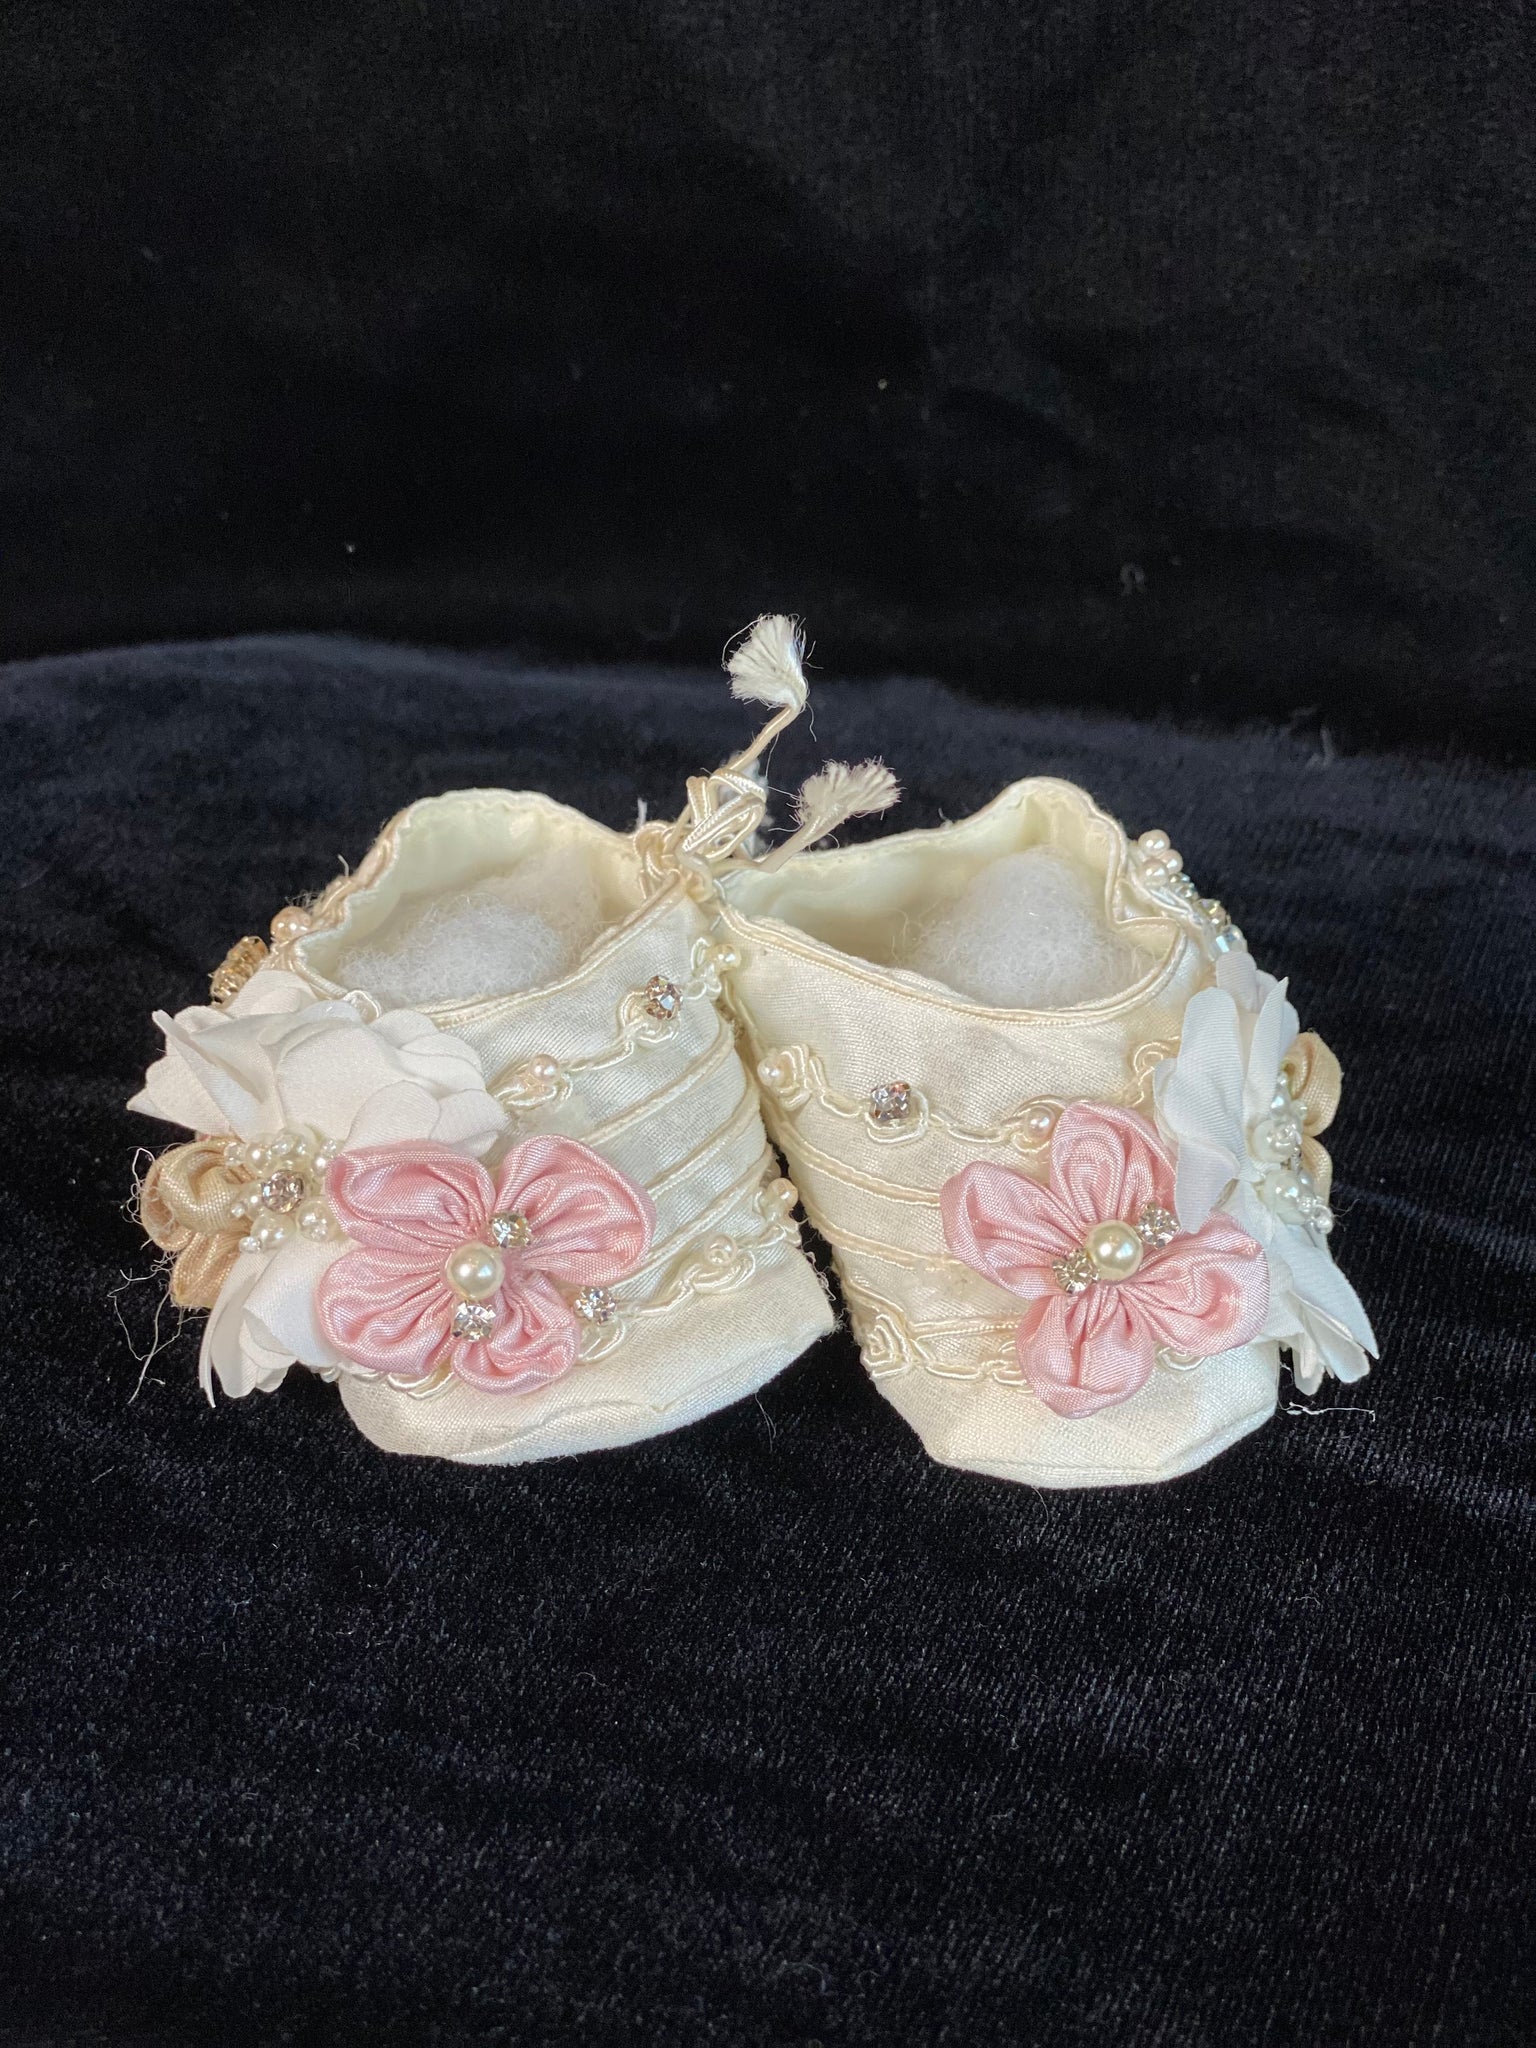 Elegant handmade ivory baby girl ankle boots with embroidery, lace, flowers, and jewels (pearls and crystals) with side string closure.